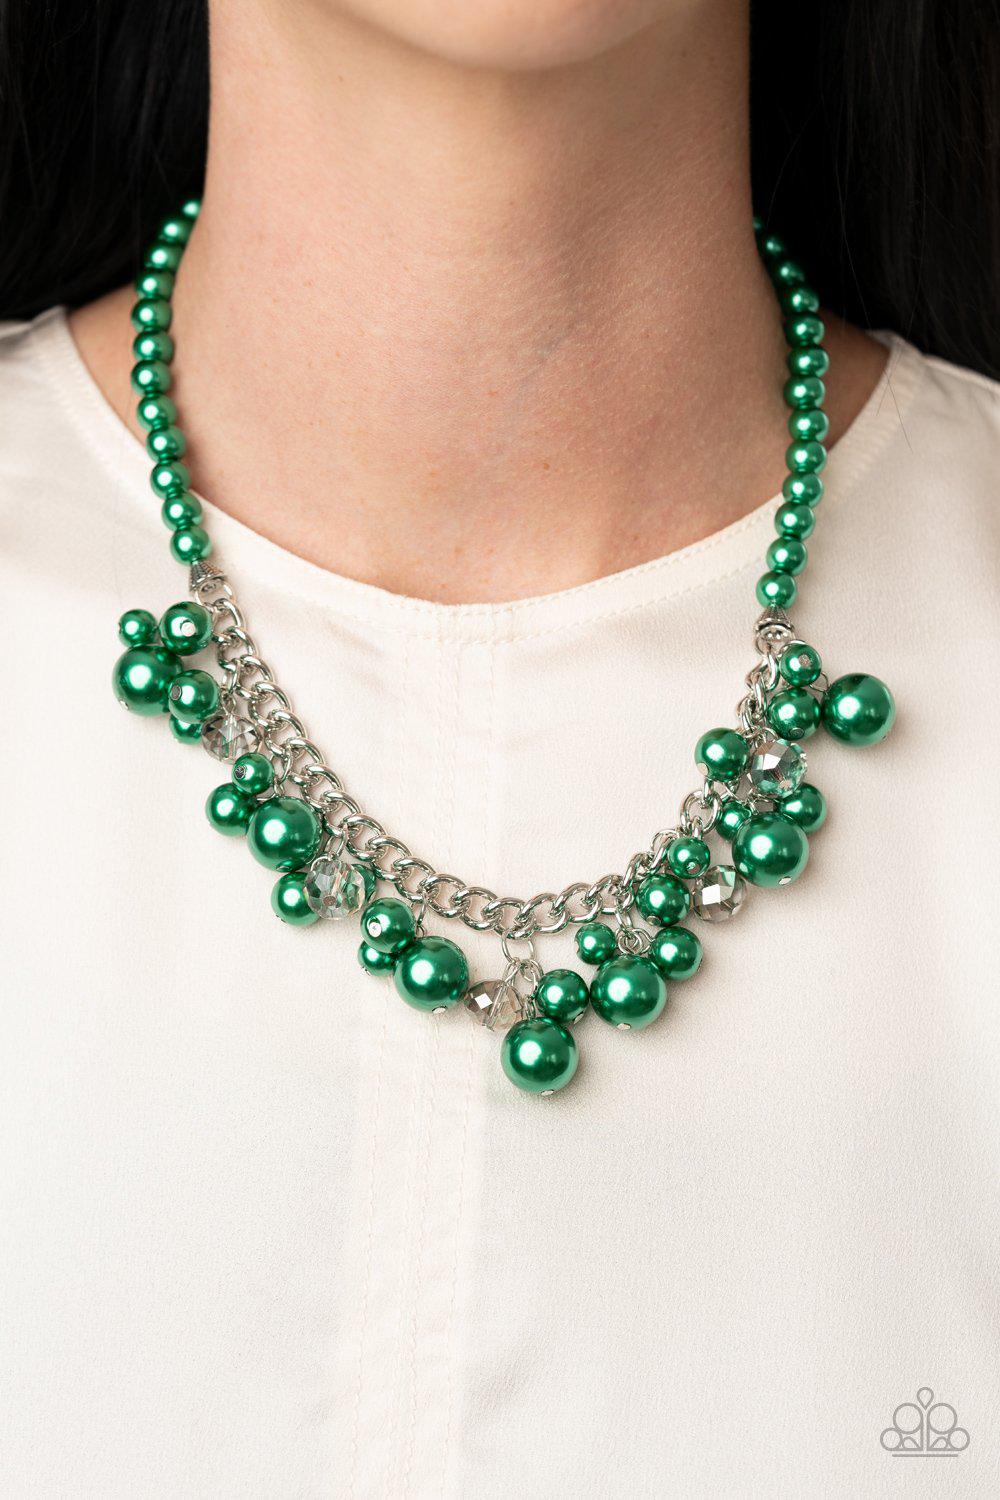 Prim and POLISHED Green Pearl Necklace - Paparazzi Accessories - model -CarasShop.com - $5 Jewelry by Cara Jewels